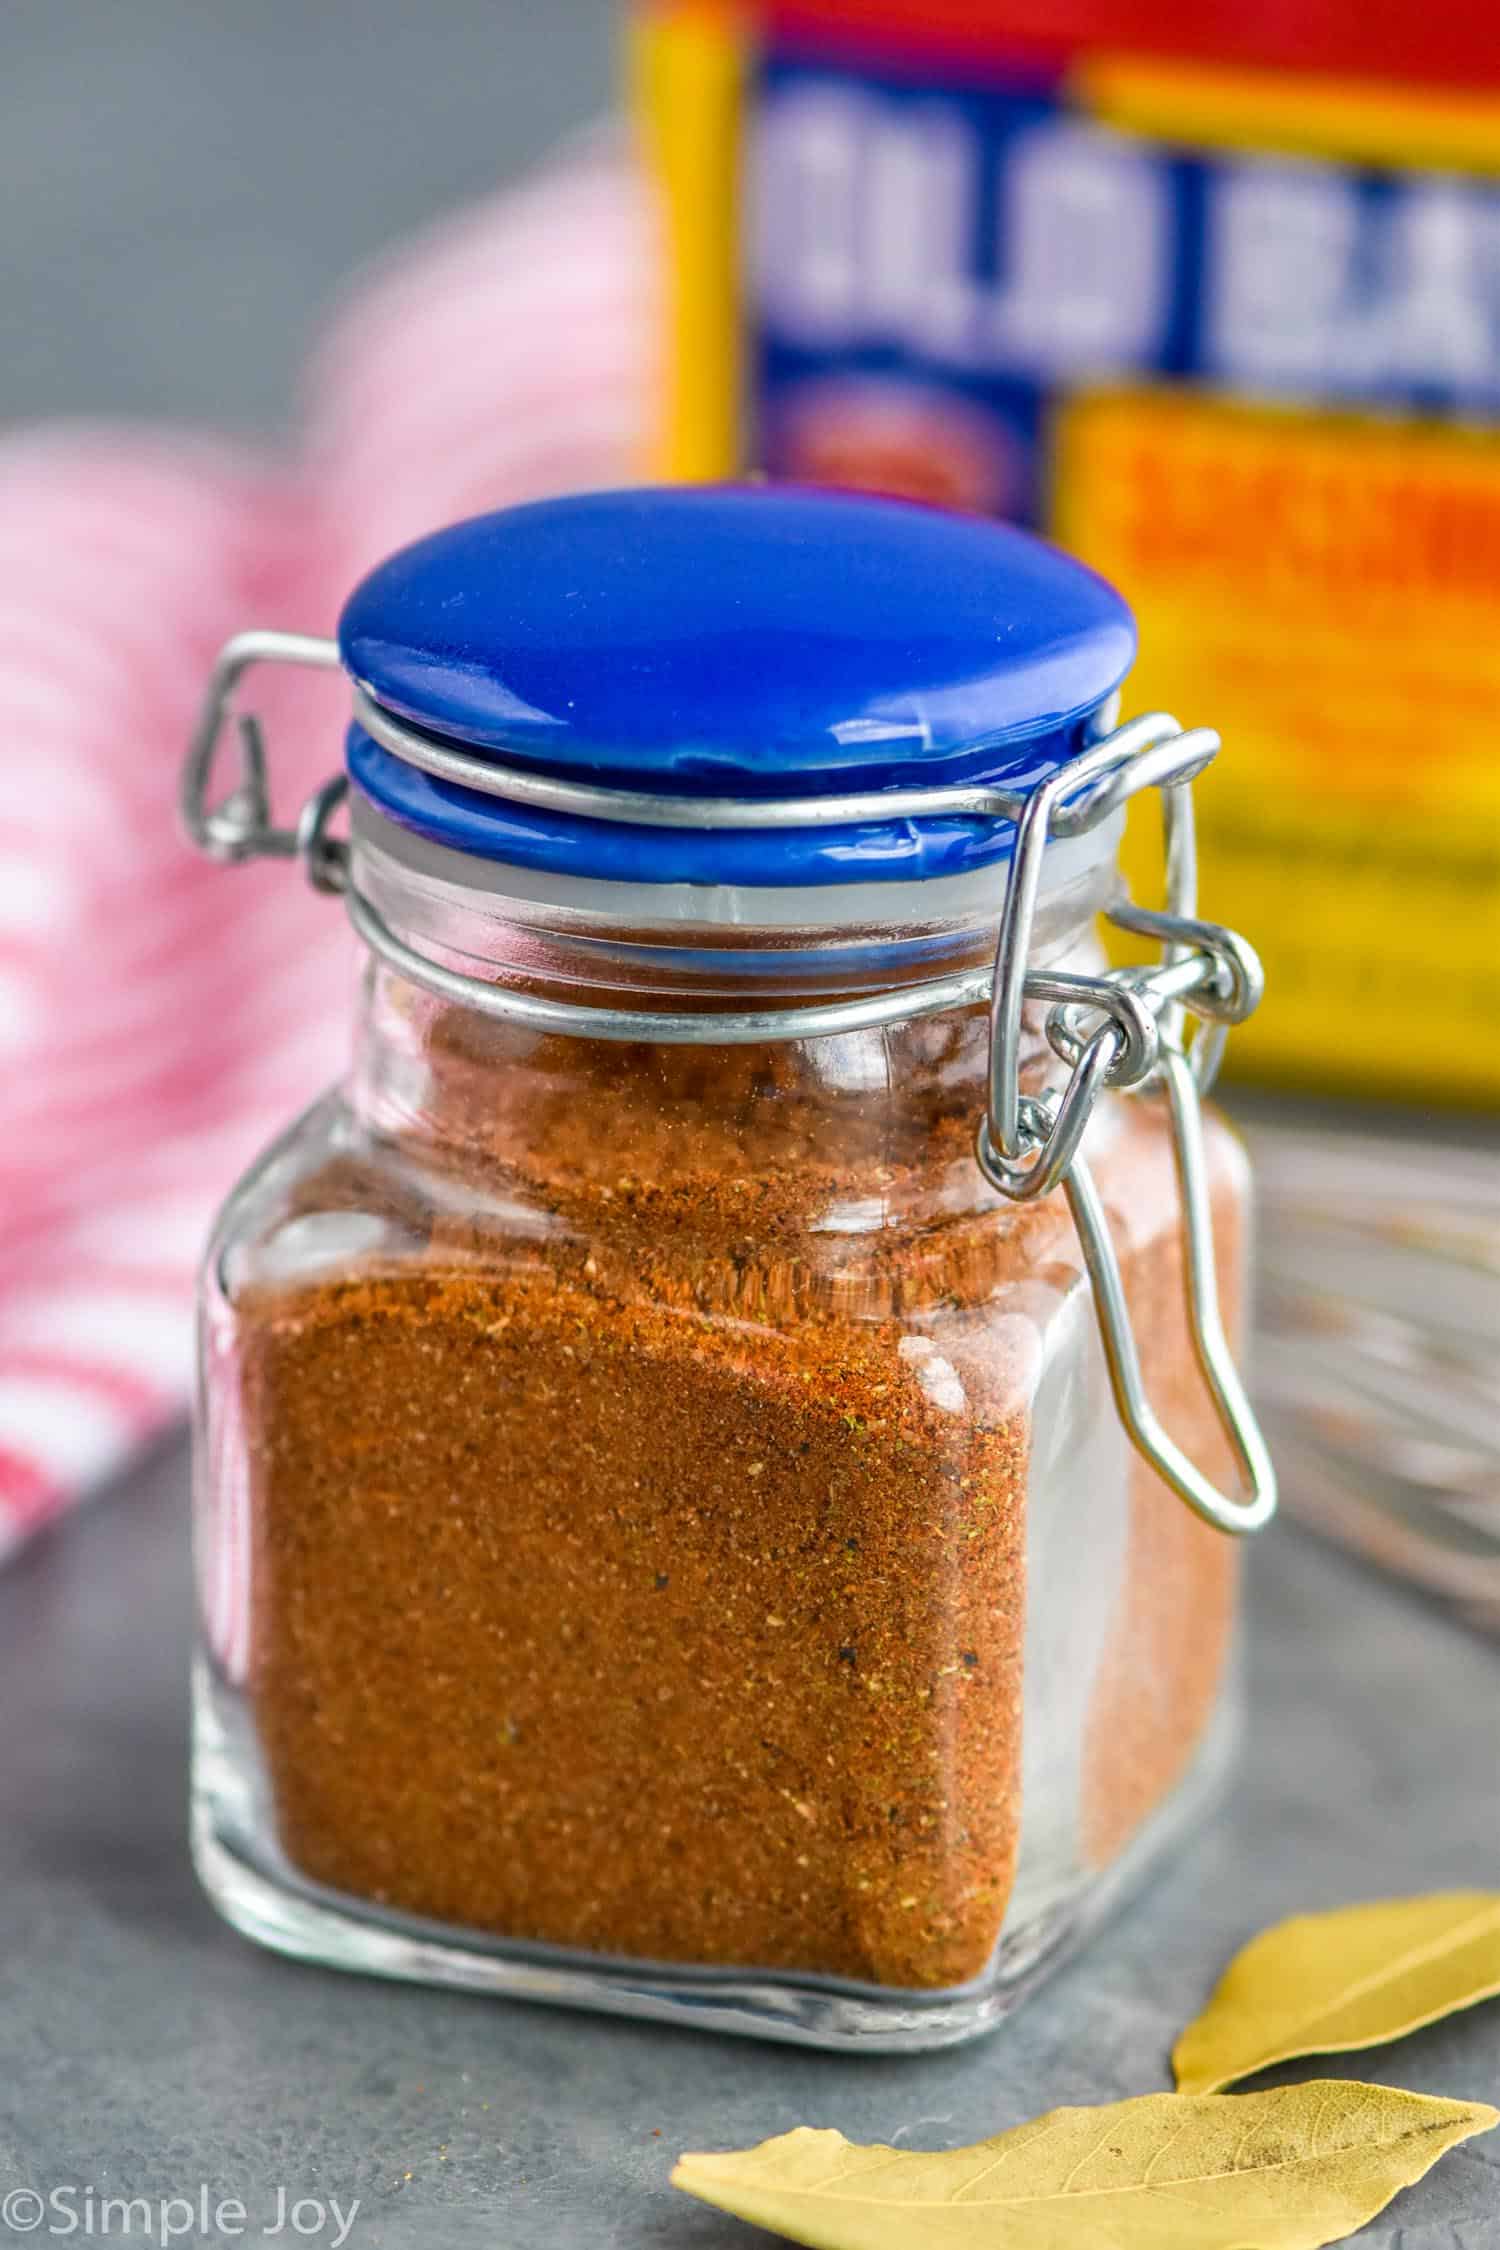 Or spicing things up:  Homemade spices, Spice recipes, Seasoning